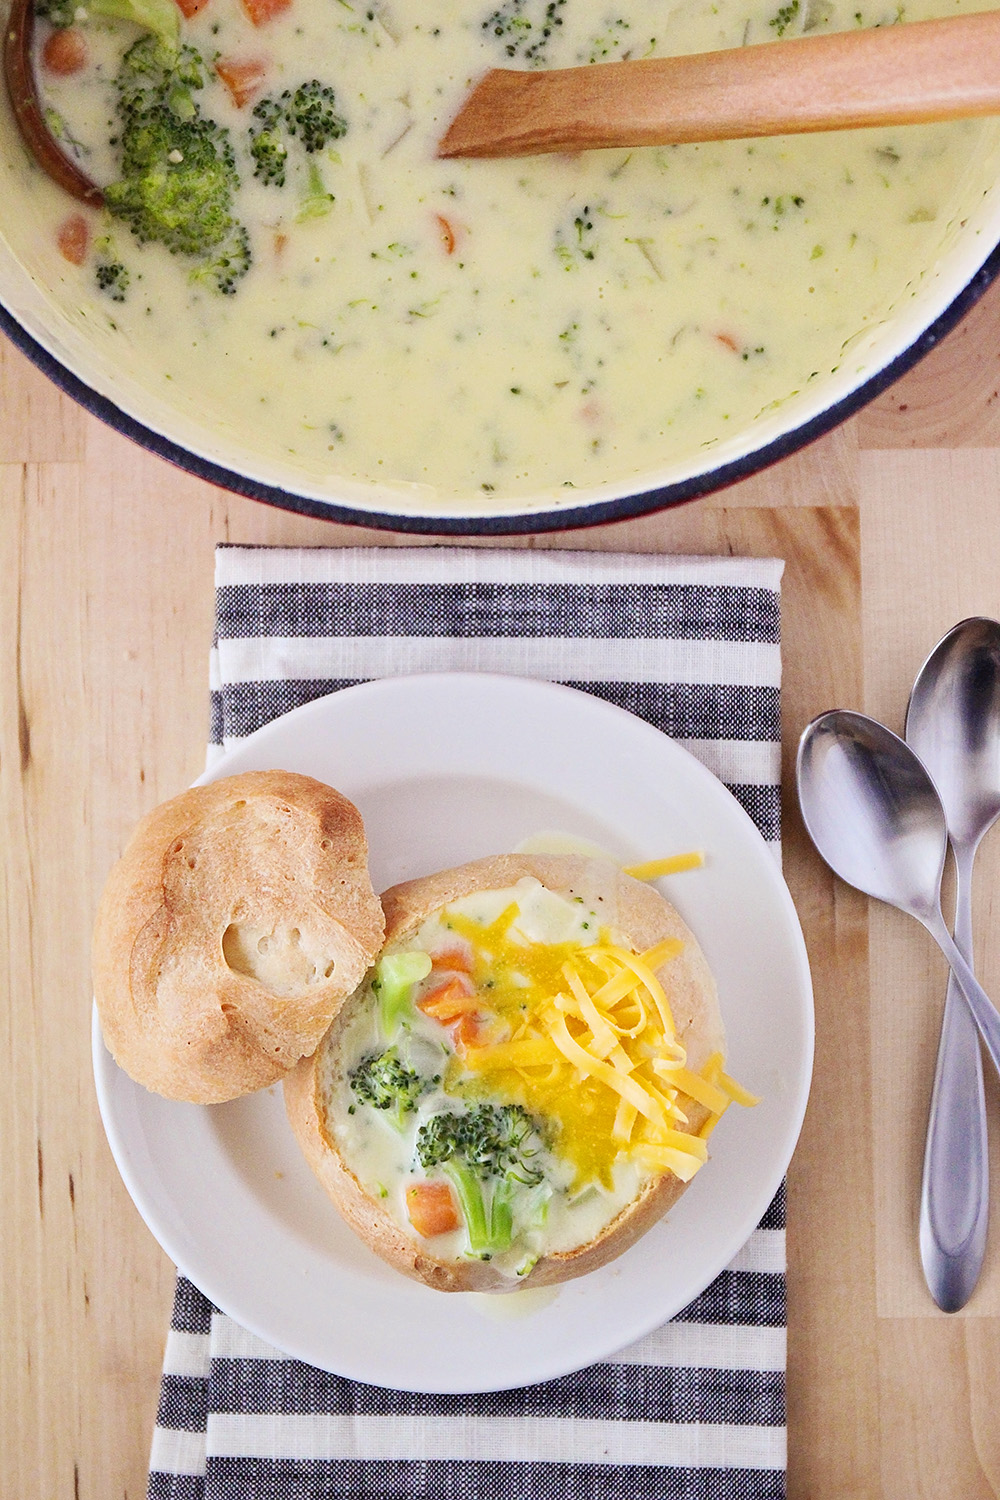 Making your favorite restaurant soup at home is easy and delicious with this Panera-copycat broccoli cheddar soup!